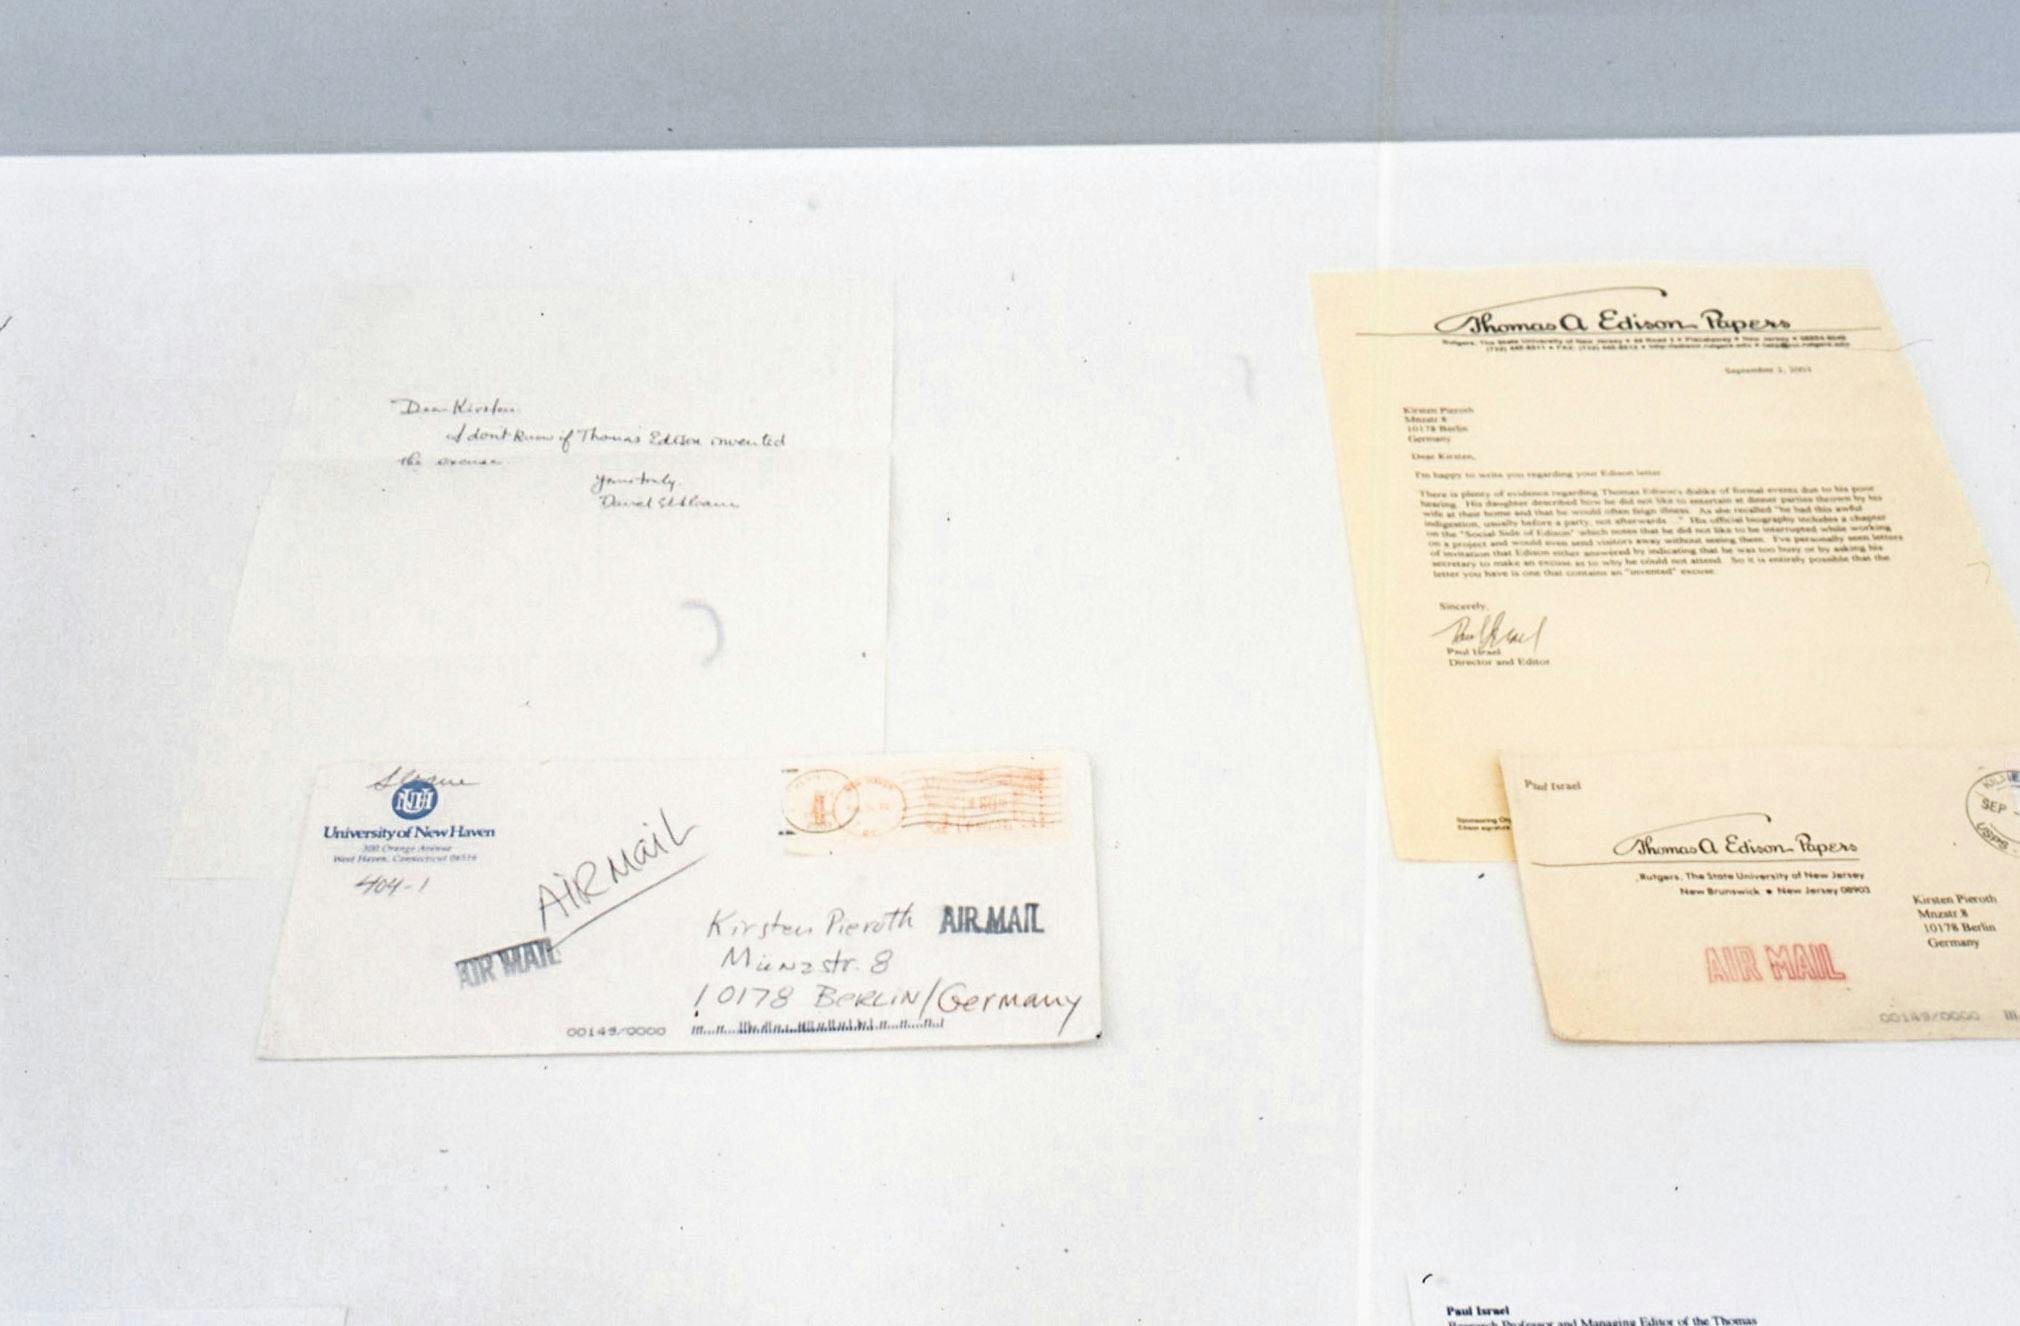 Detail of an installation. In a display case, two sets of a letter and an envelope are exhibited. Both letters were sent to the artist Kirsten Pieroth. The letter on the left is handwritten and the one on the right is typed.